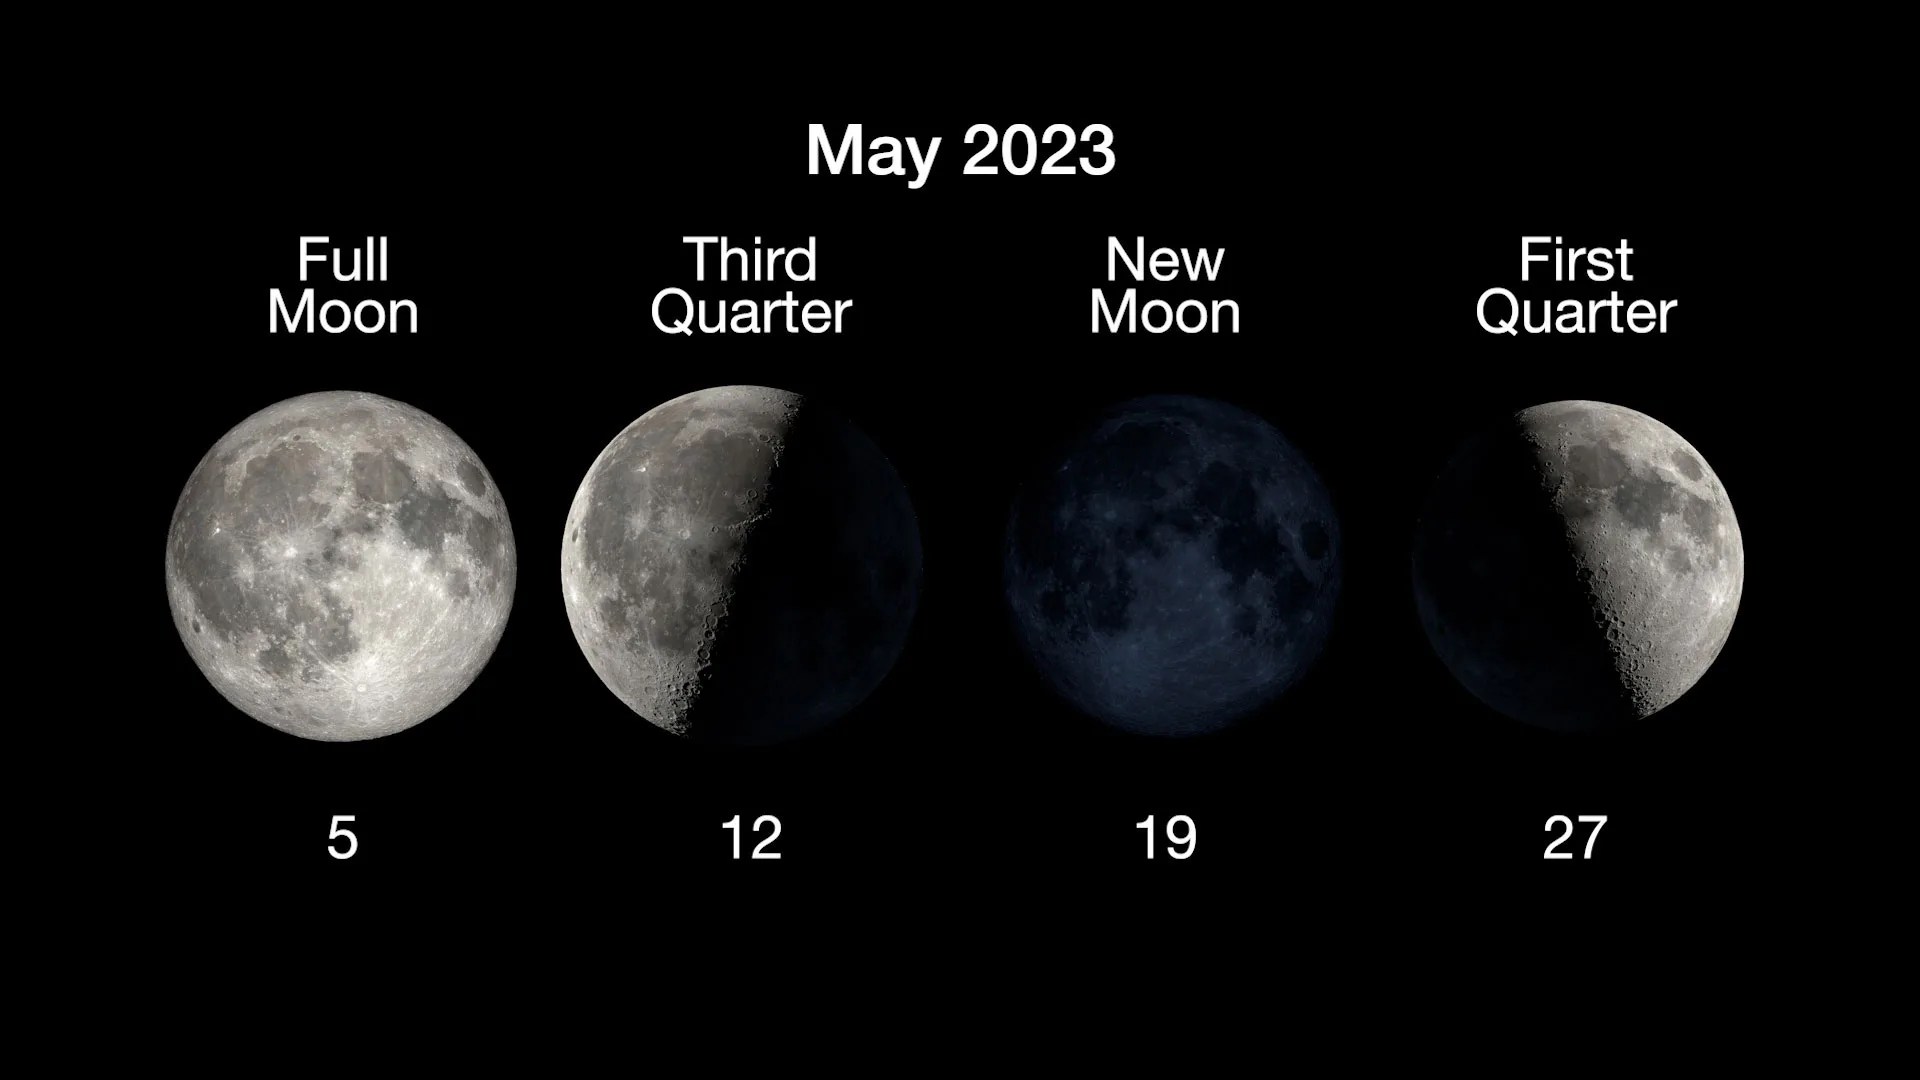 The next full moon is THIS FRIDAY May 5th, and it's the perfect time t